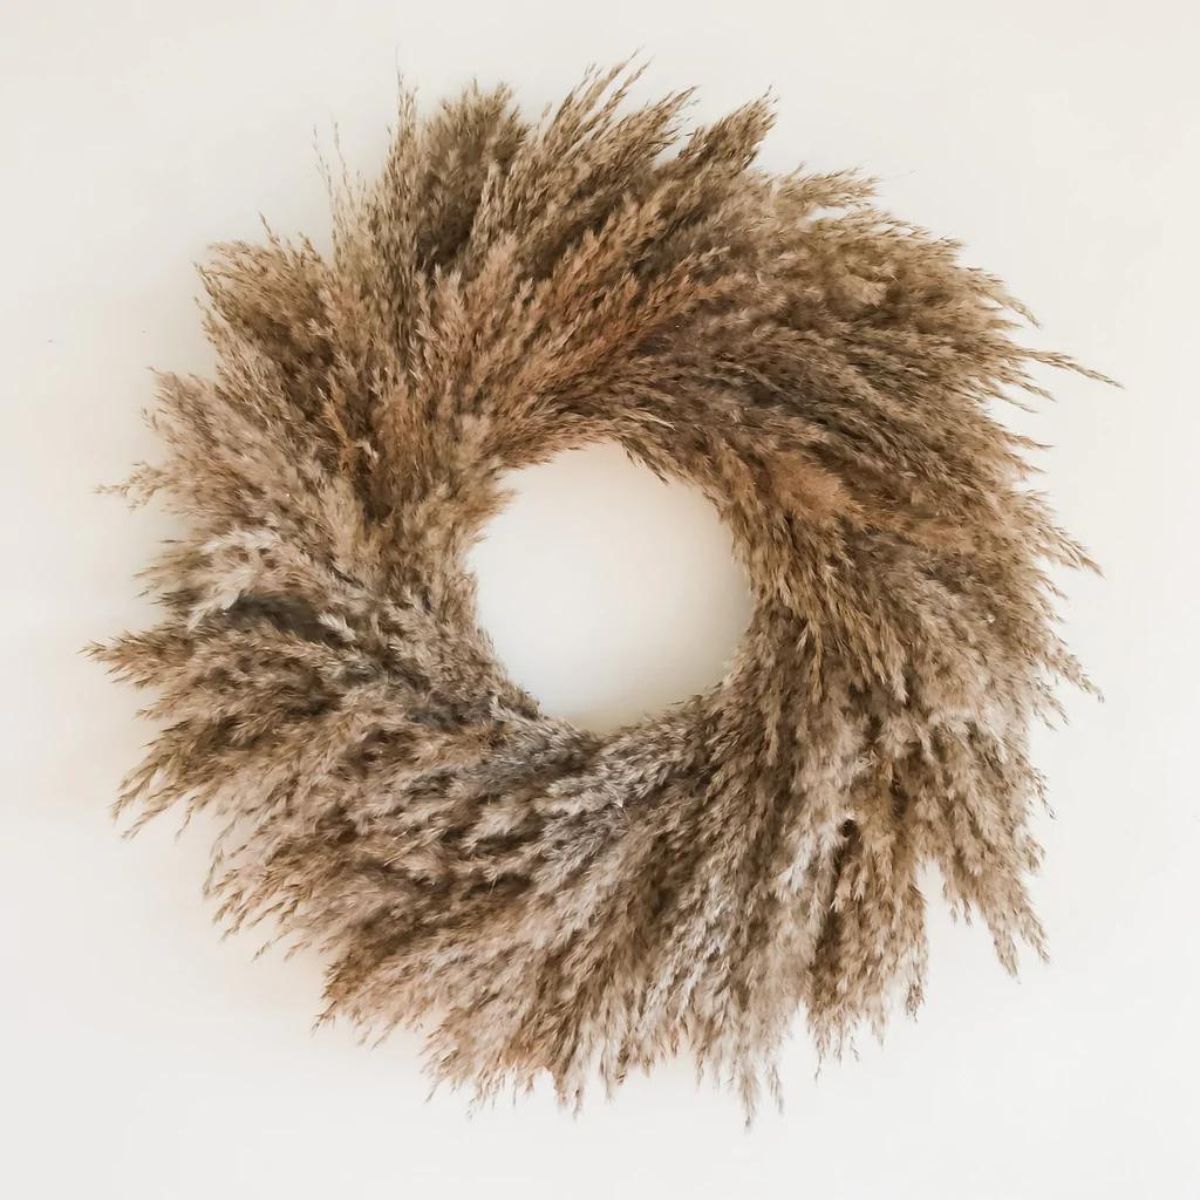 Pampas grass neutral colored wreath for decoration on Thursd